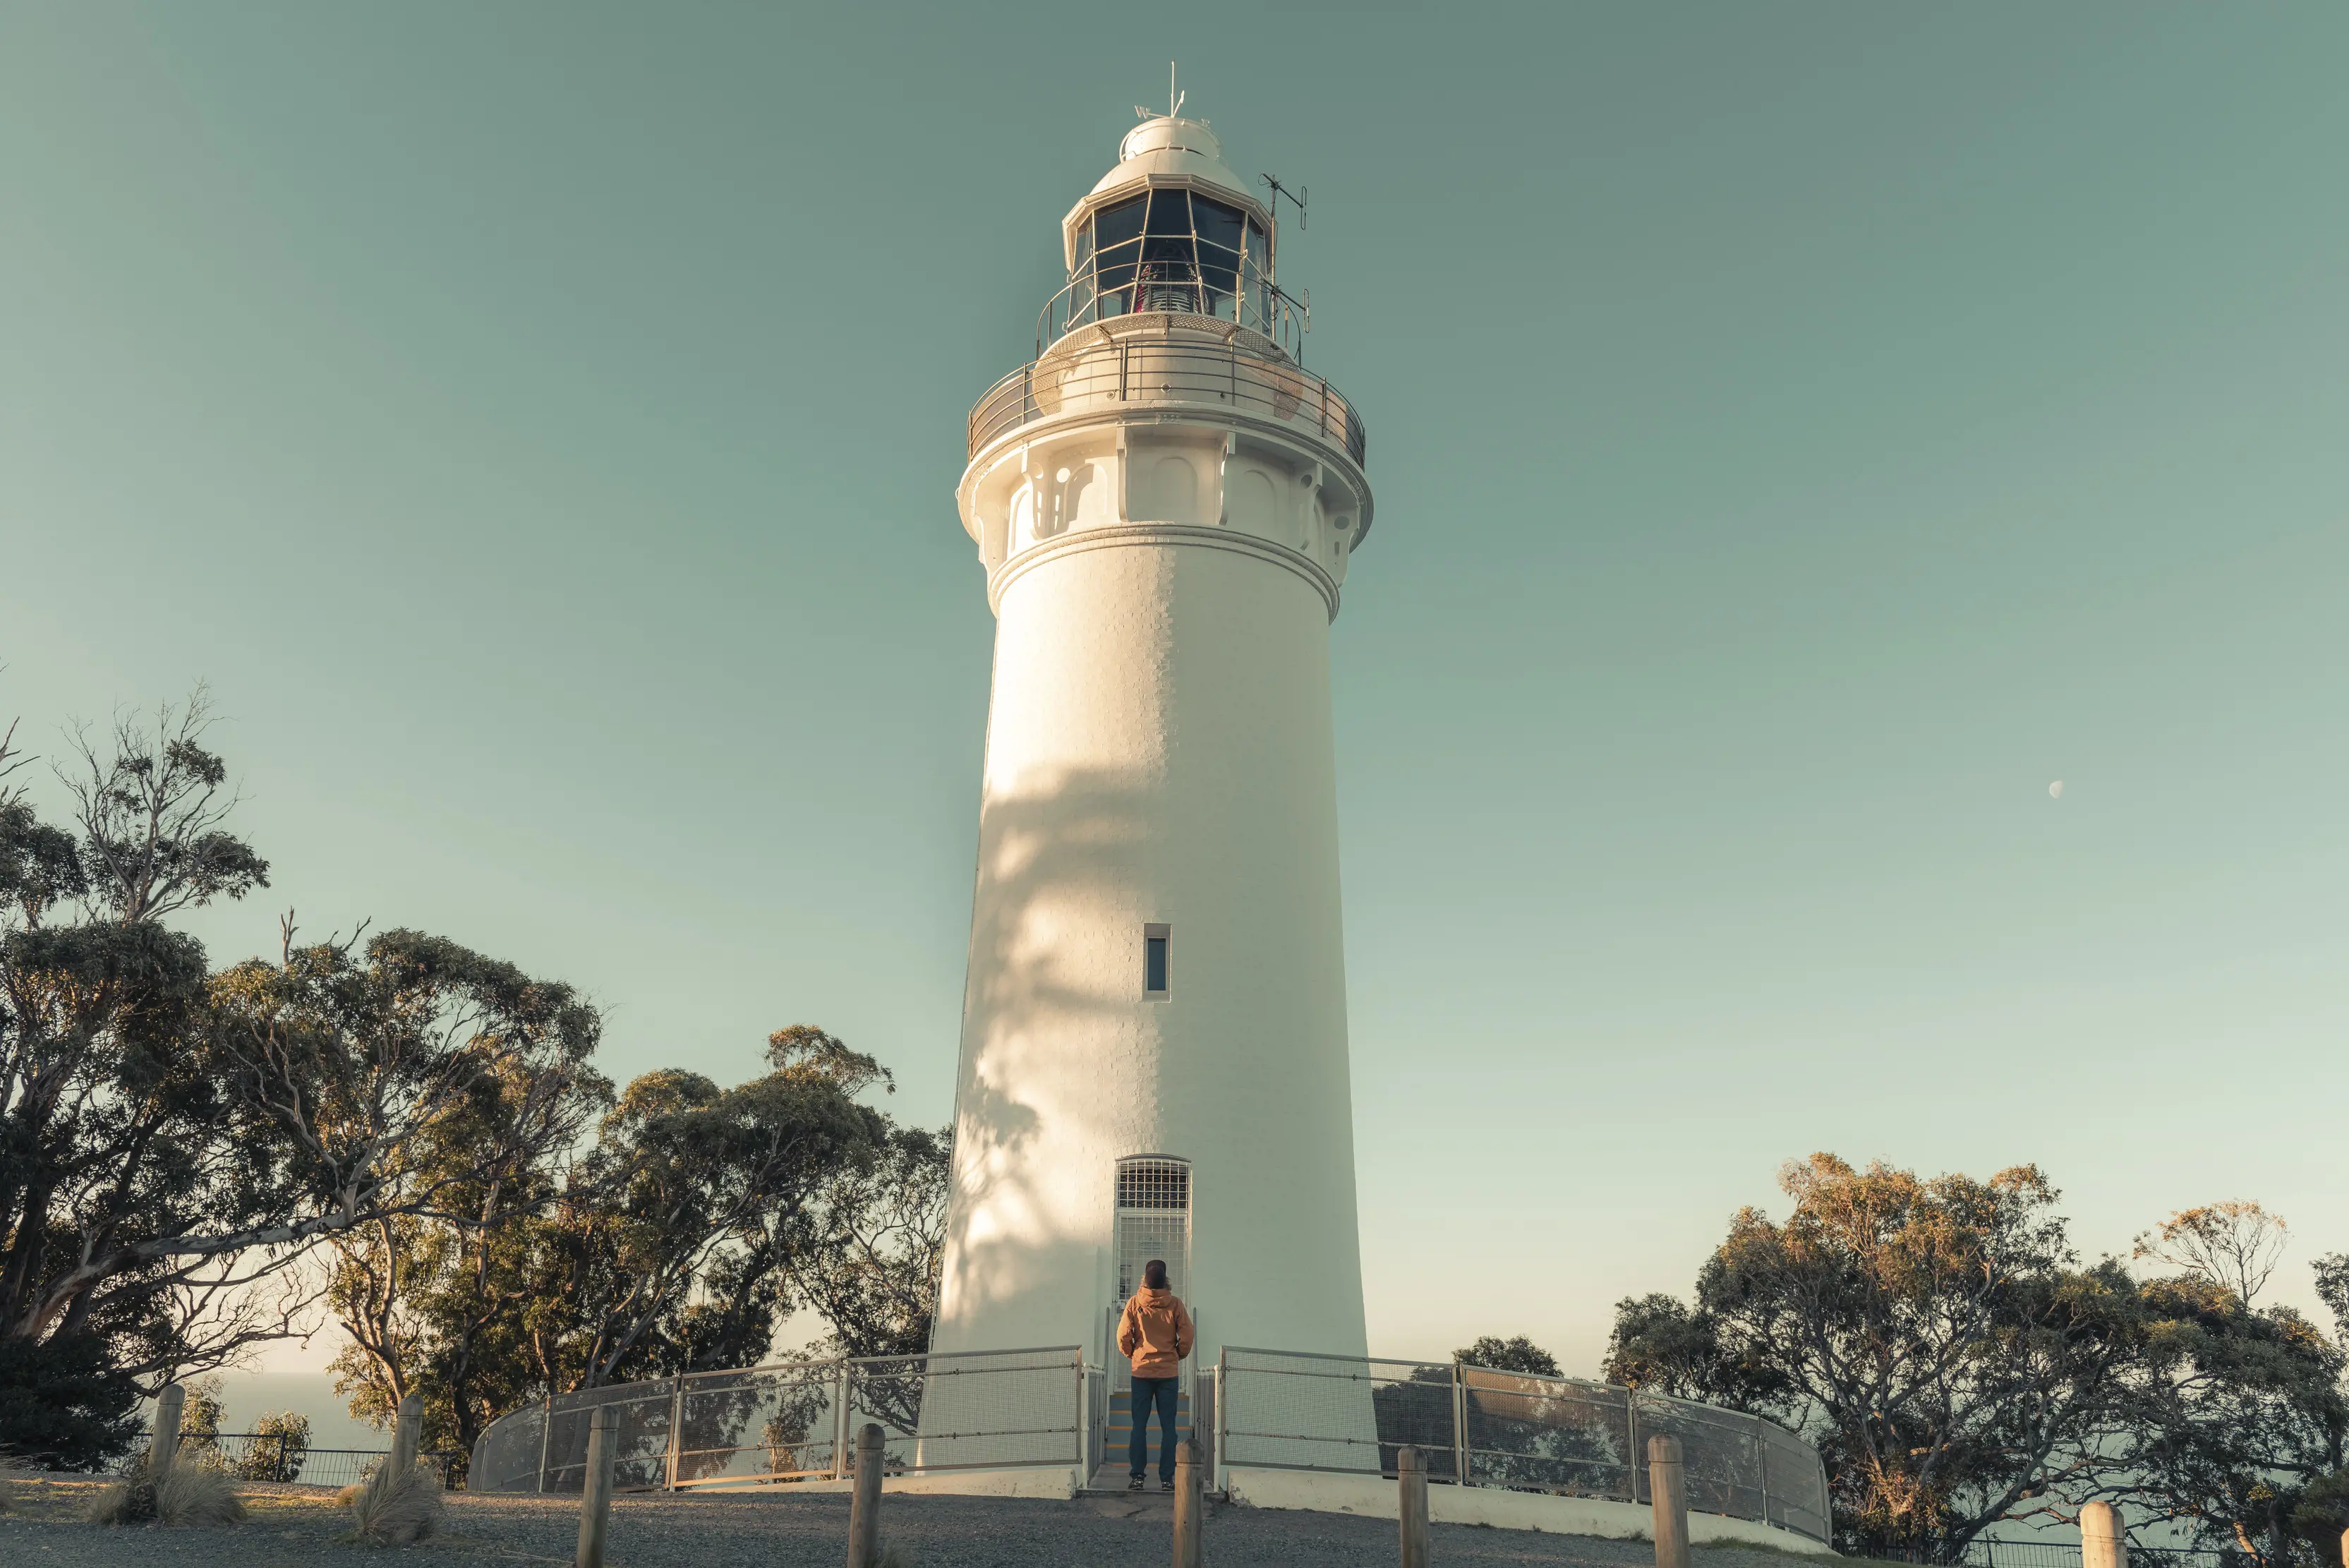 Image of the Table Cape Lighthouse with a person looking up at it from the front door.